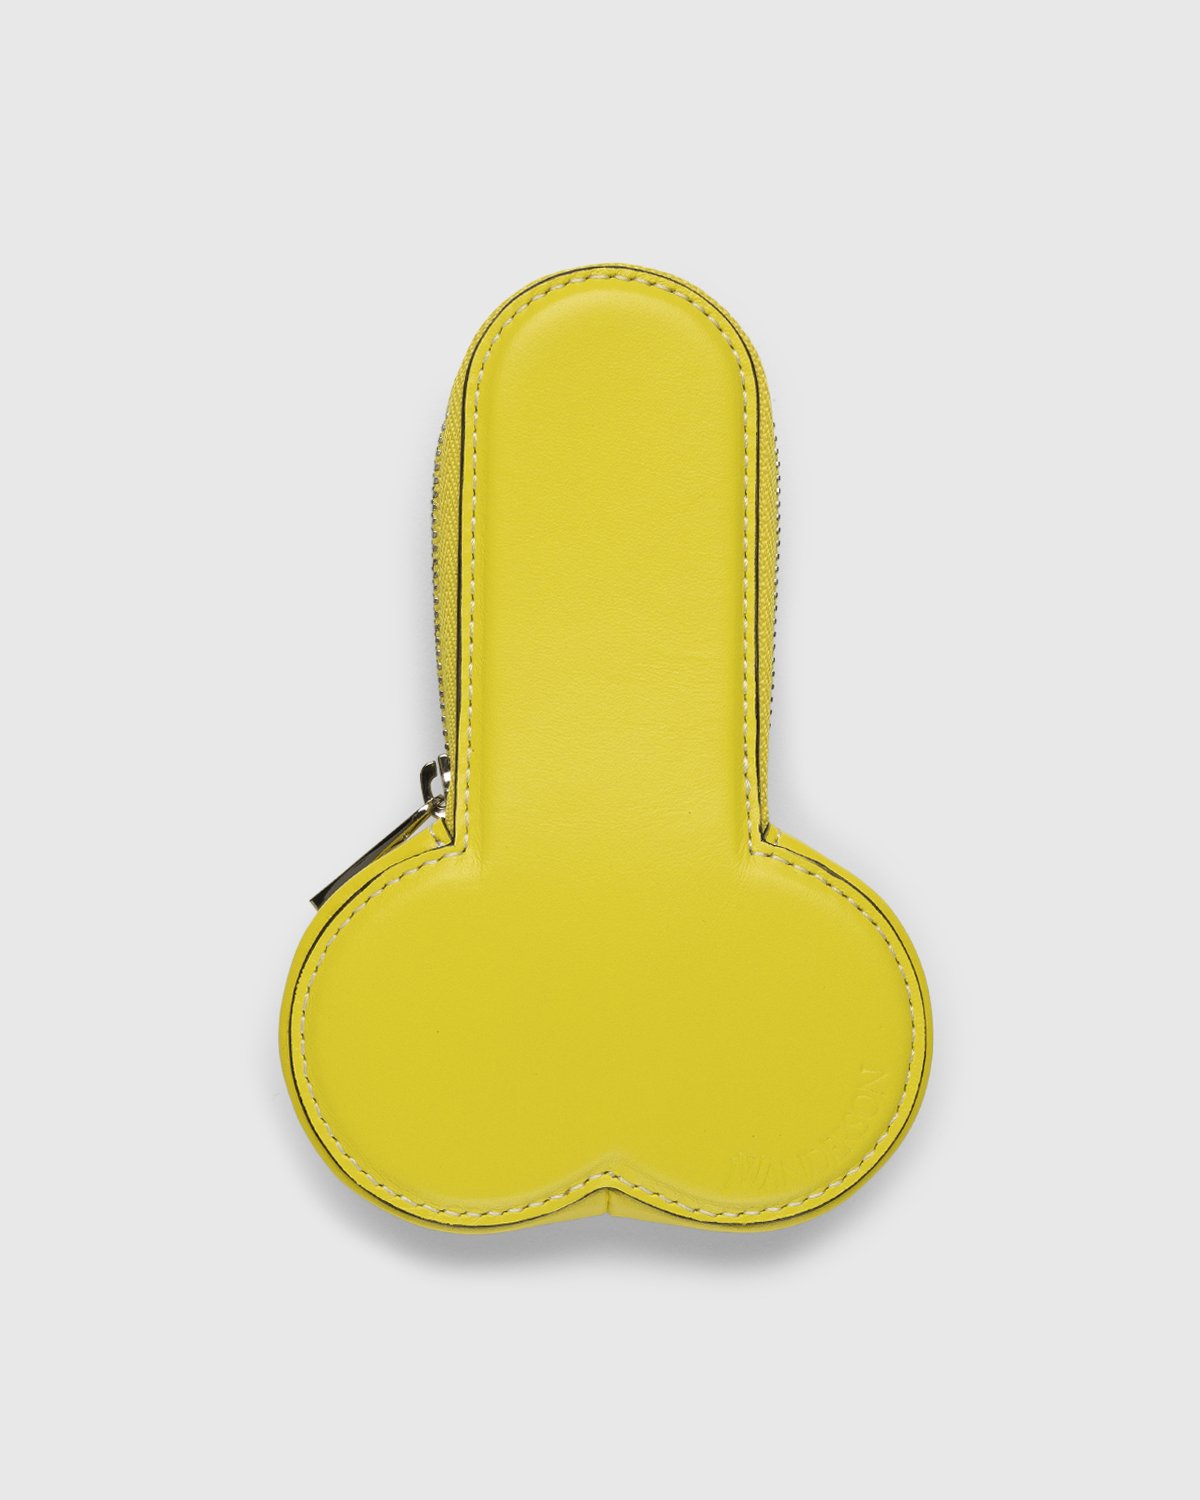 J.W. Anderson - Penis Coin Purse Yellow - Accessories - Yellow - Image 3